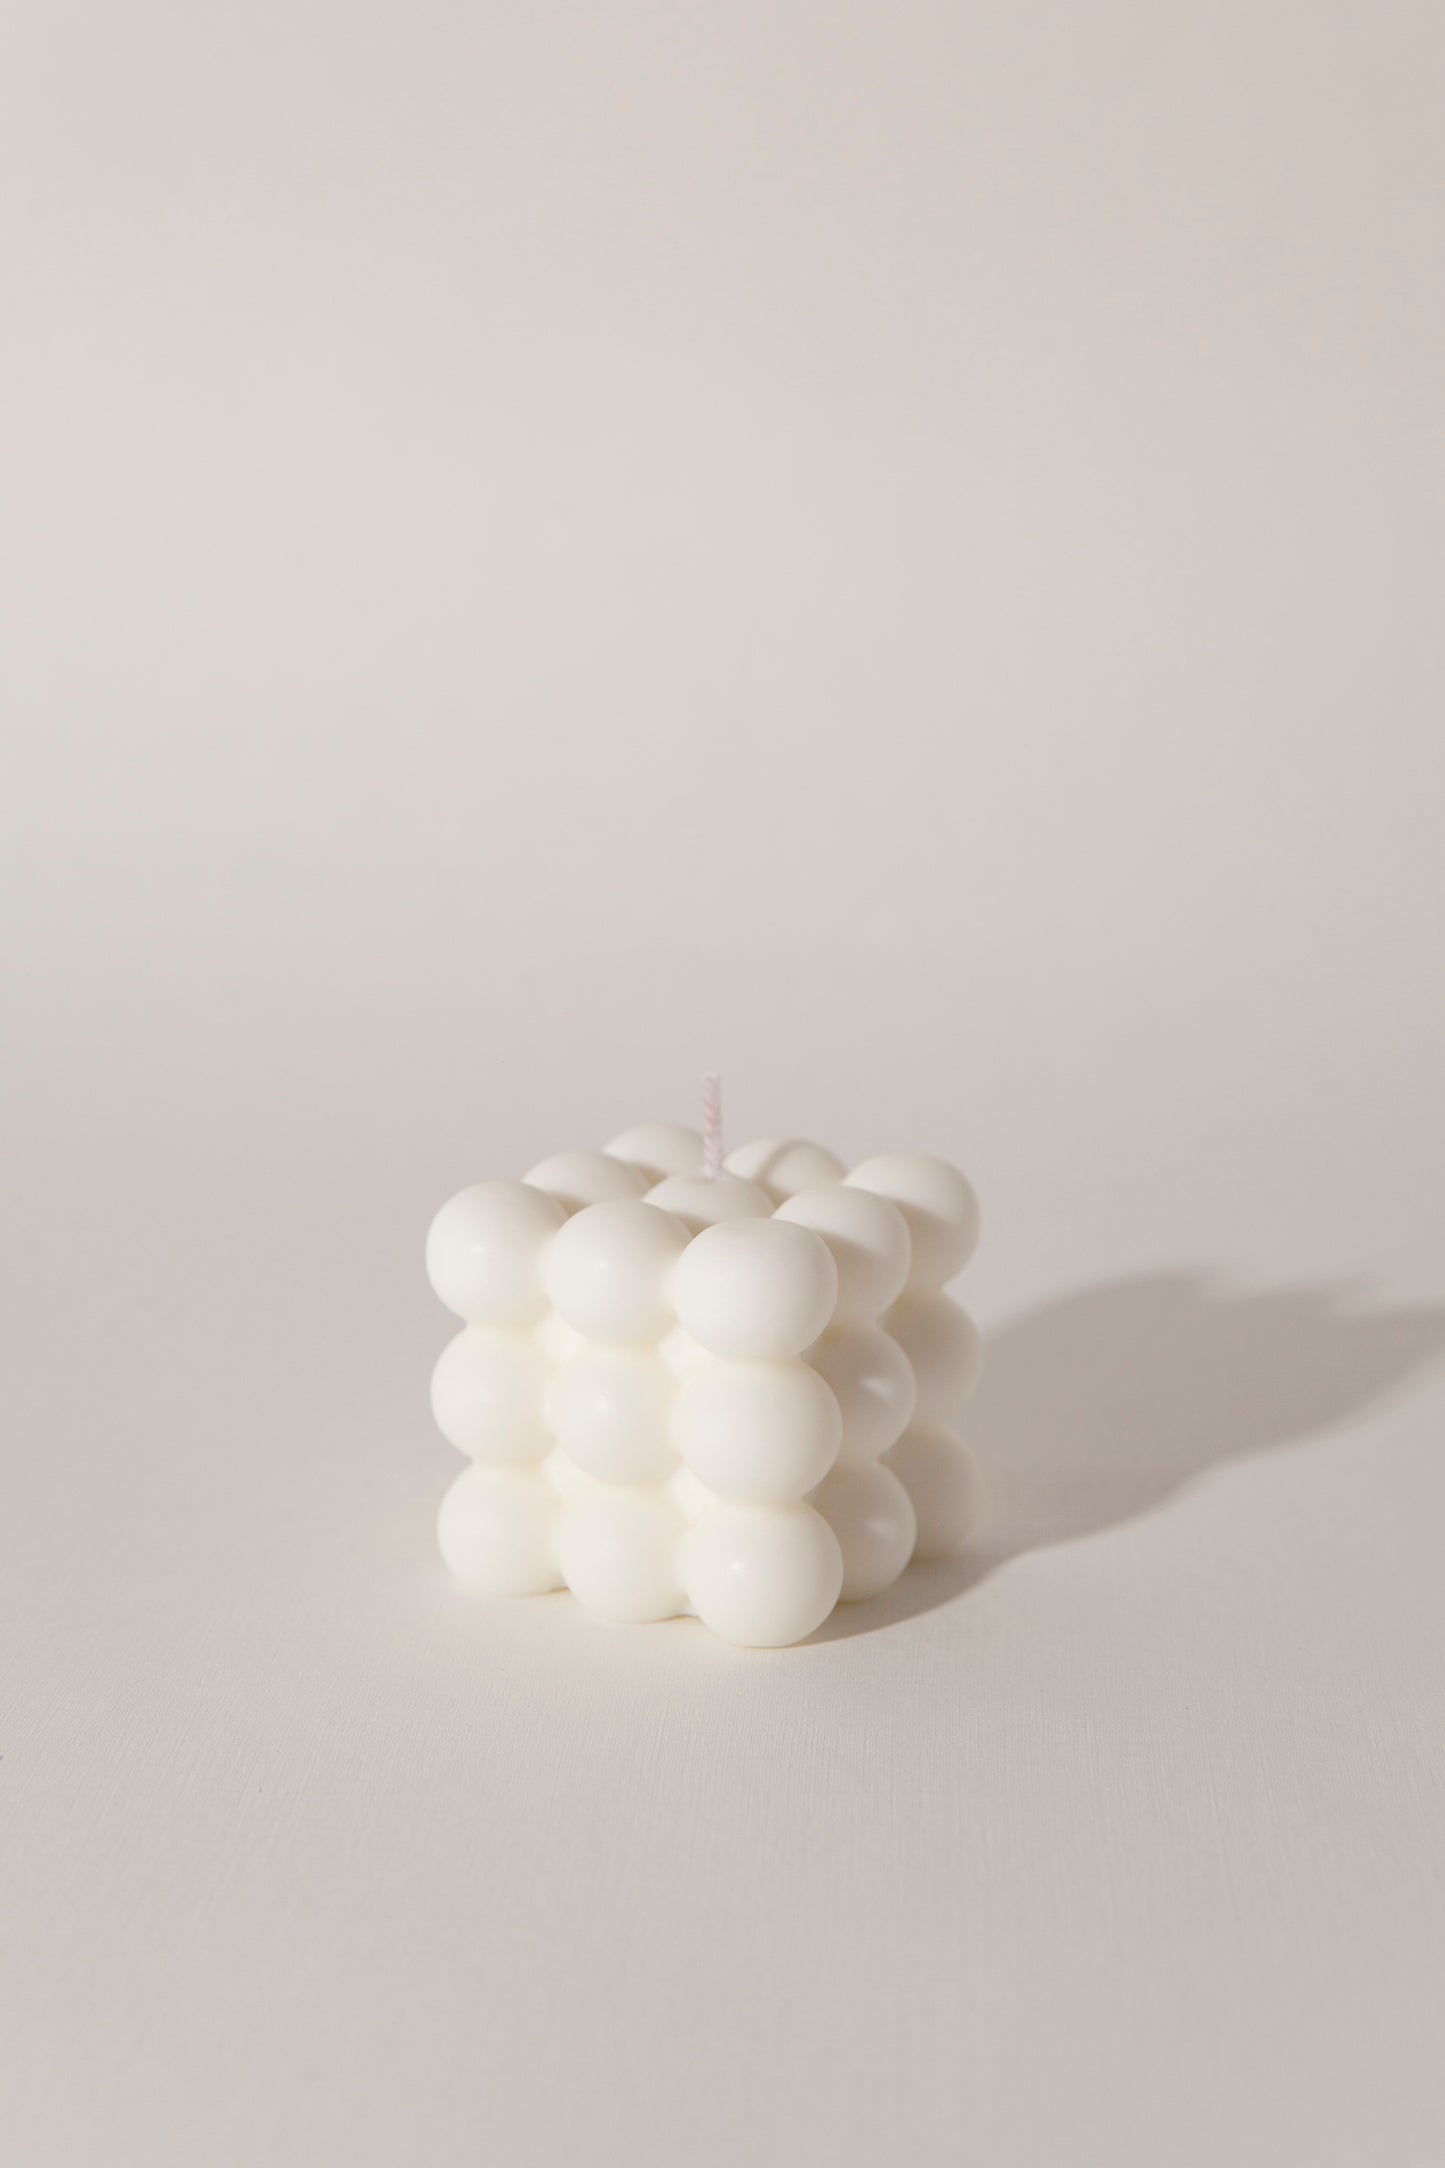 The Sculpted Candles